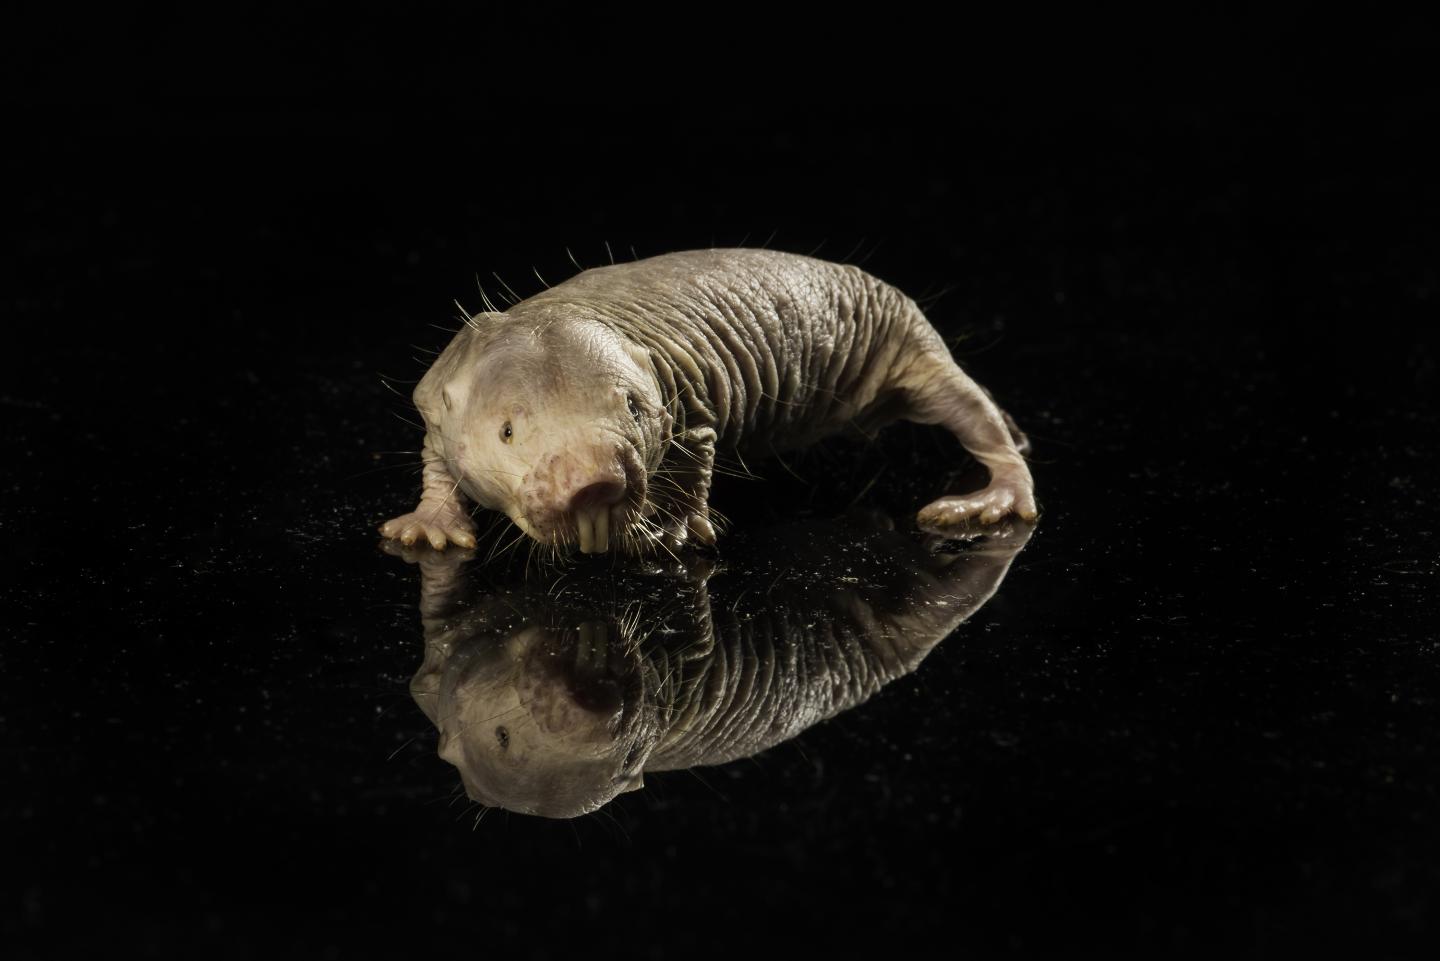 Naked mole rat genome: The key to long life?